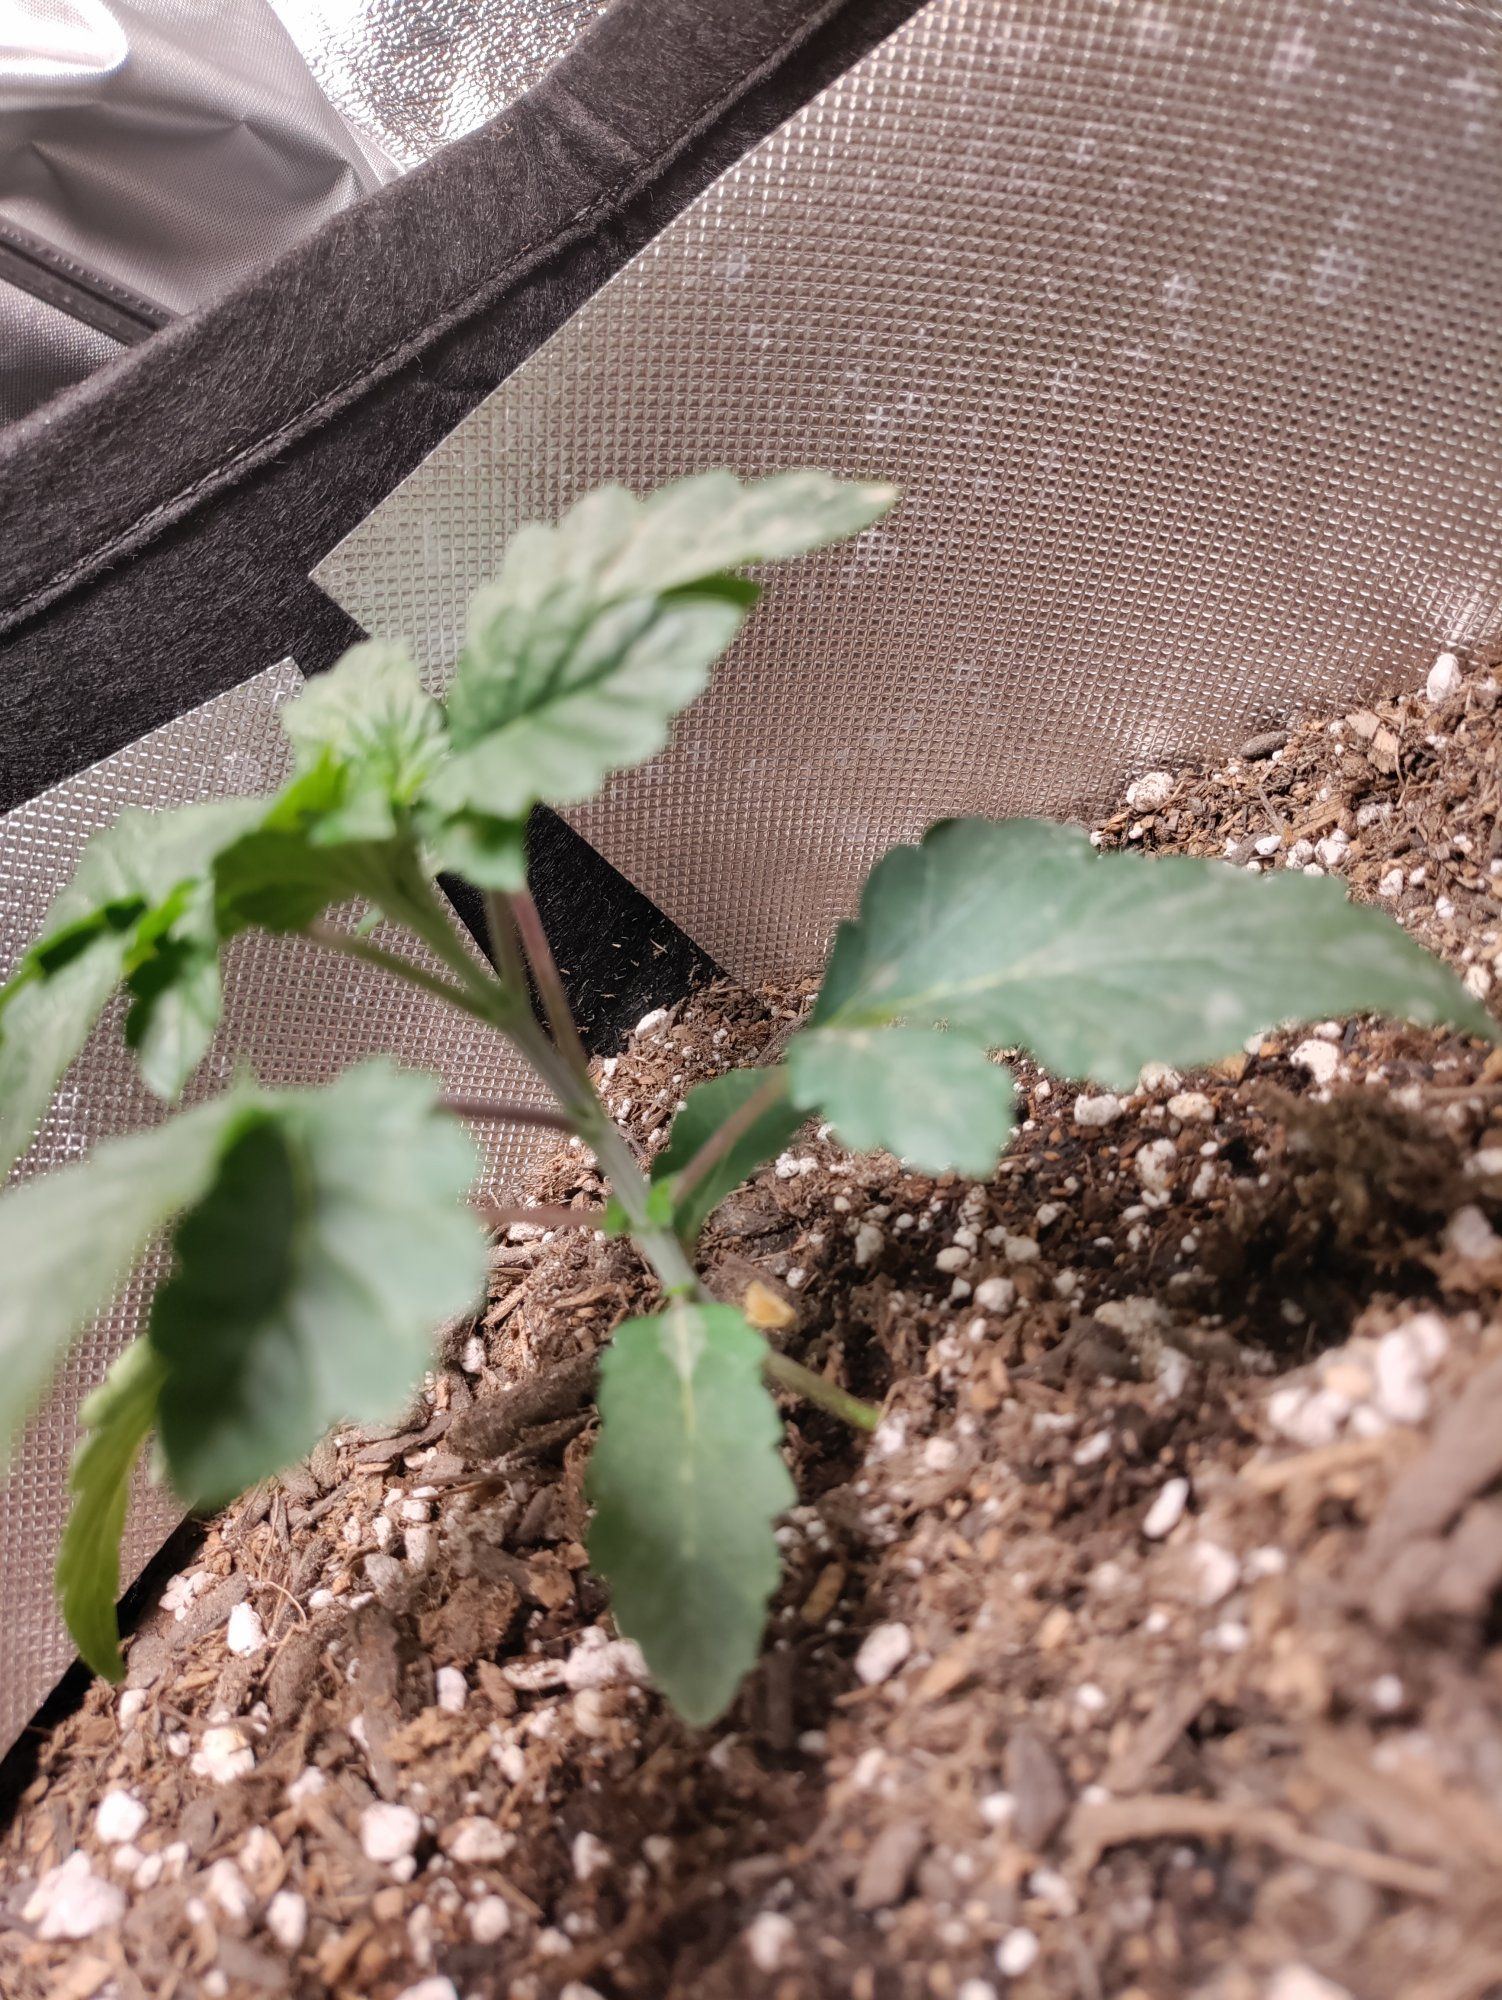 Help plant has wrinkled leaves and its growth slowed down 2